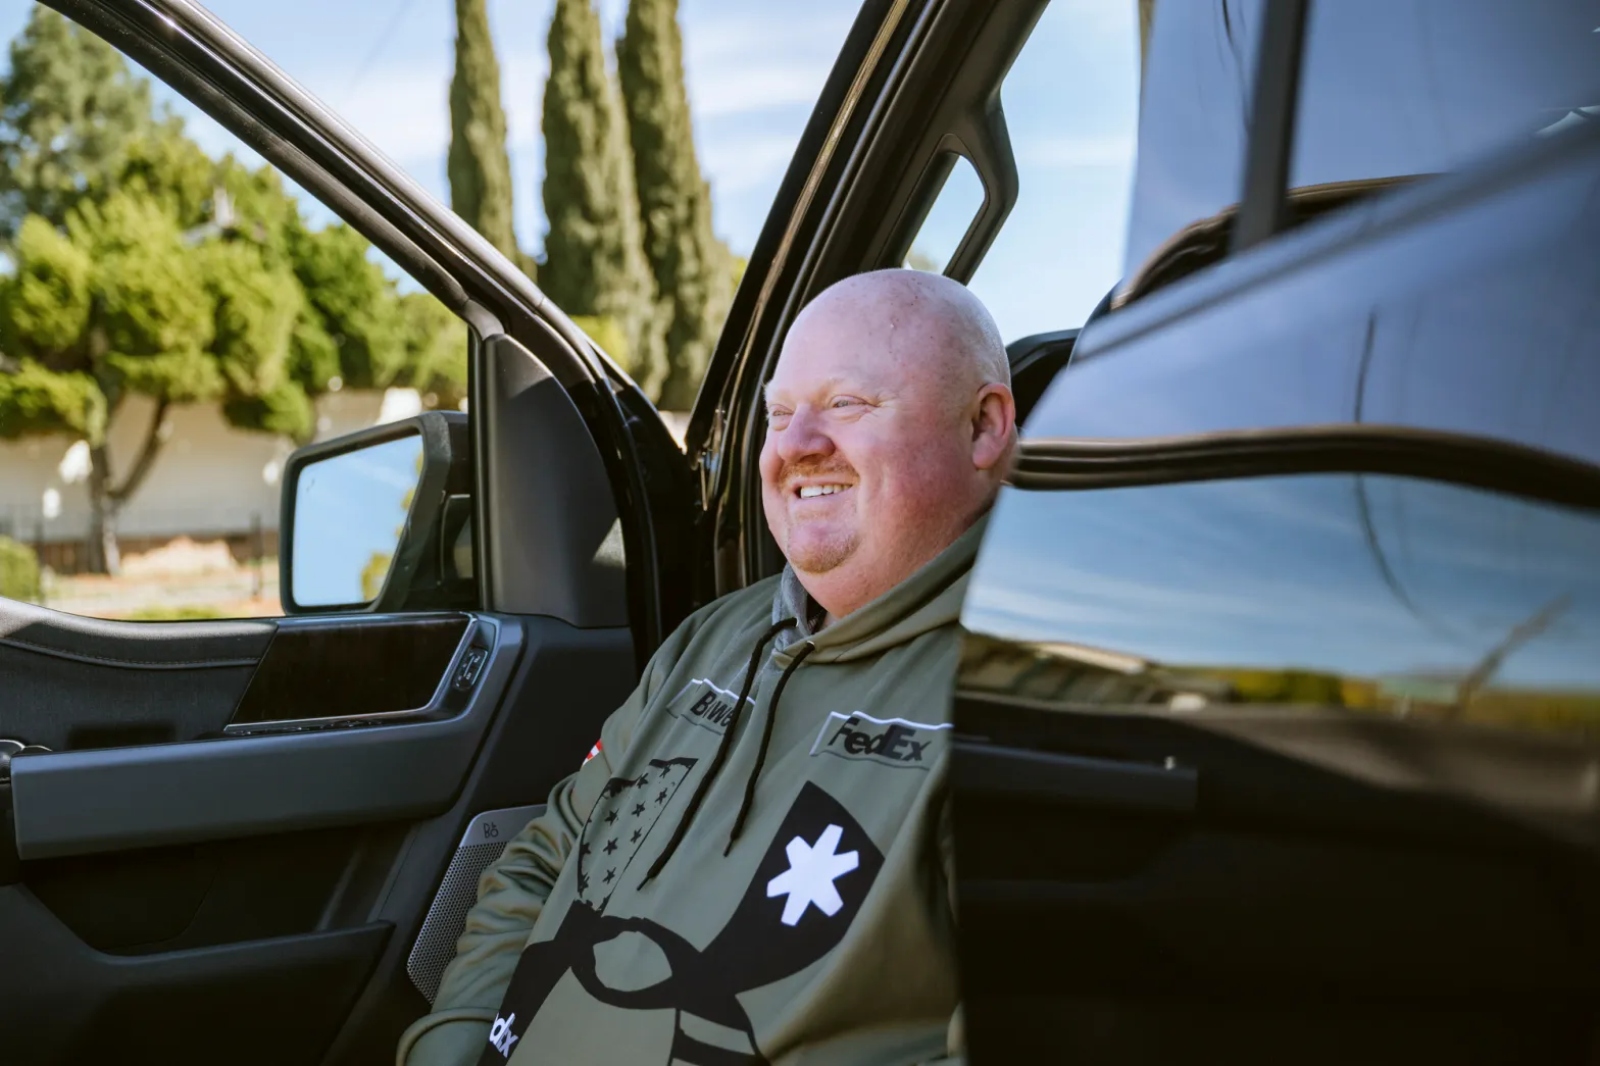 A smiling bald man in a green sweatshirt sits in the front seat of his black truck.